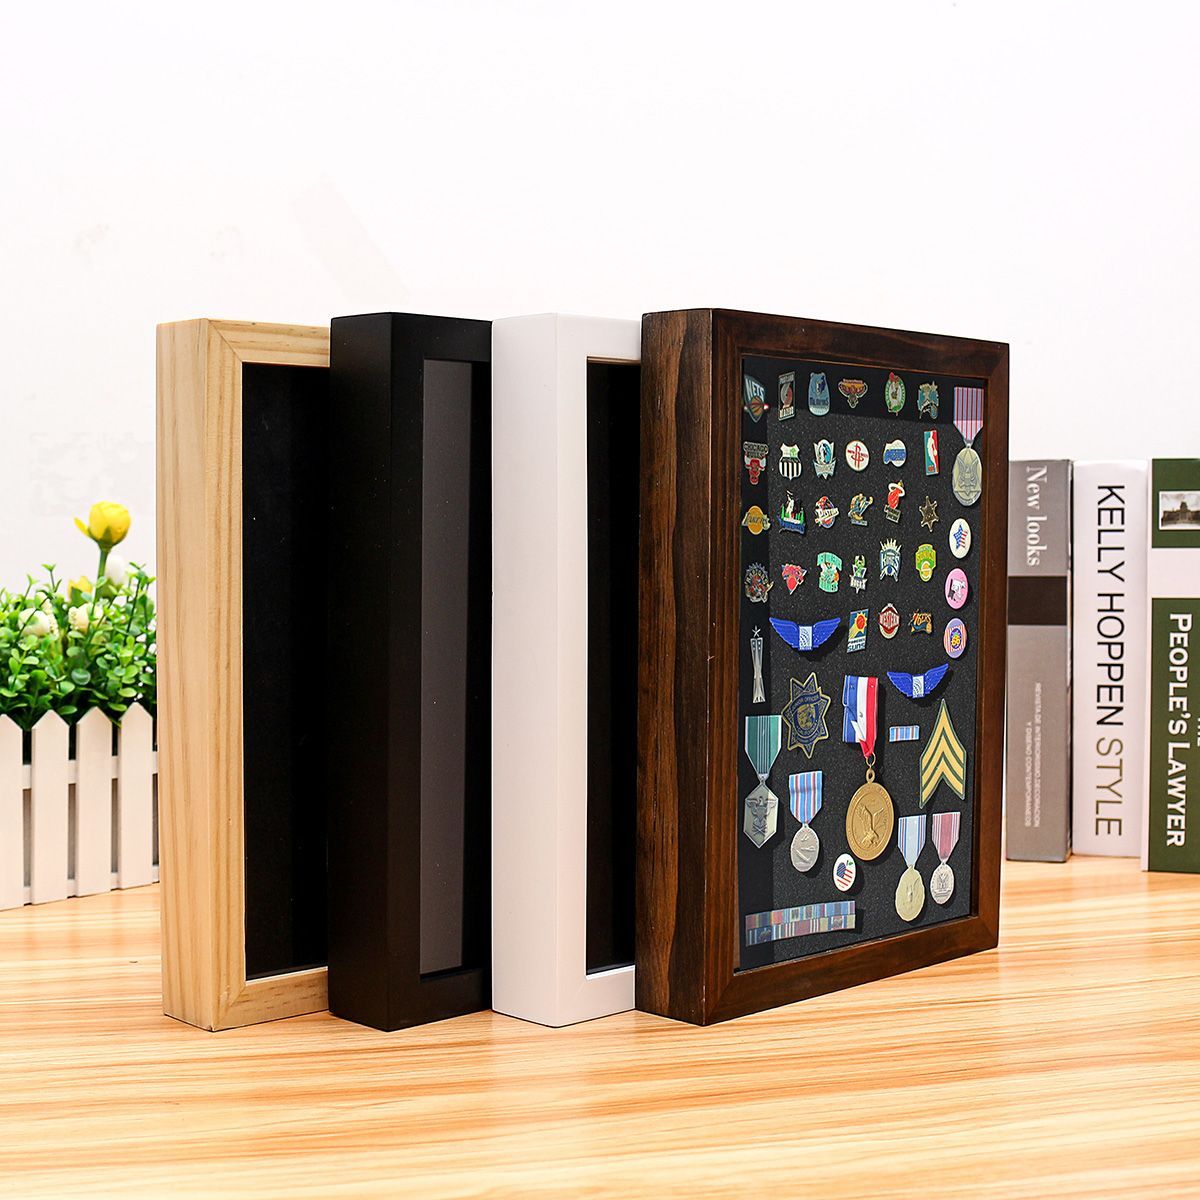 Pin-Medal-Wooden-Display-Case-Storage-Frame-Box-for-Wall-Hanging-Desktop-Decorations-1599784